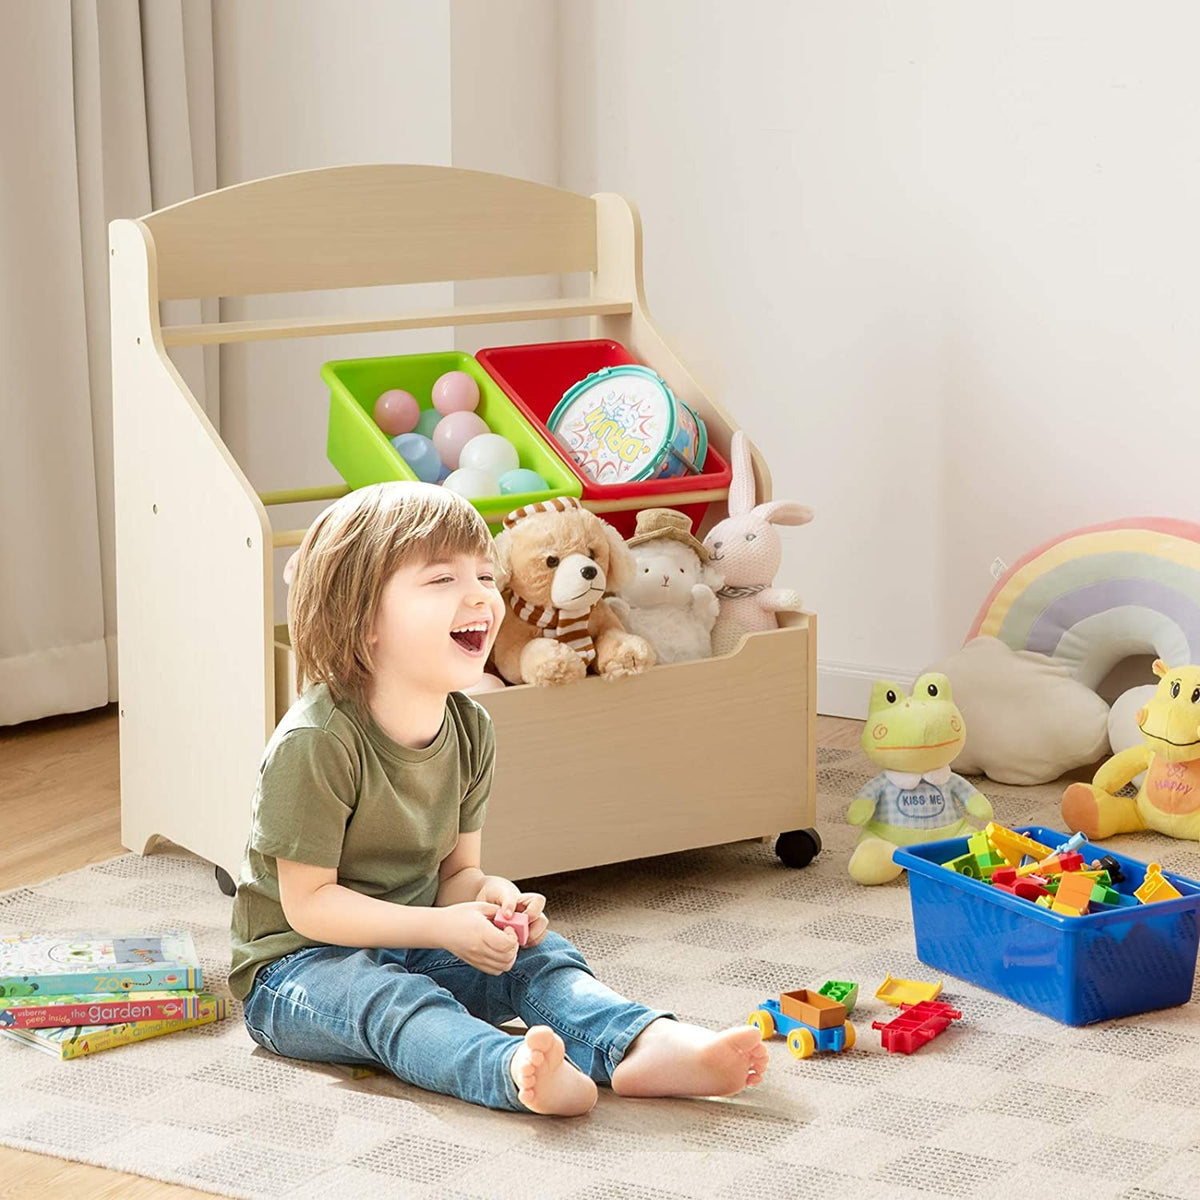 ChildrensWooden Bookcase & Toy Storage Unit | Rollout Drawer